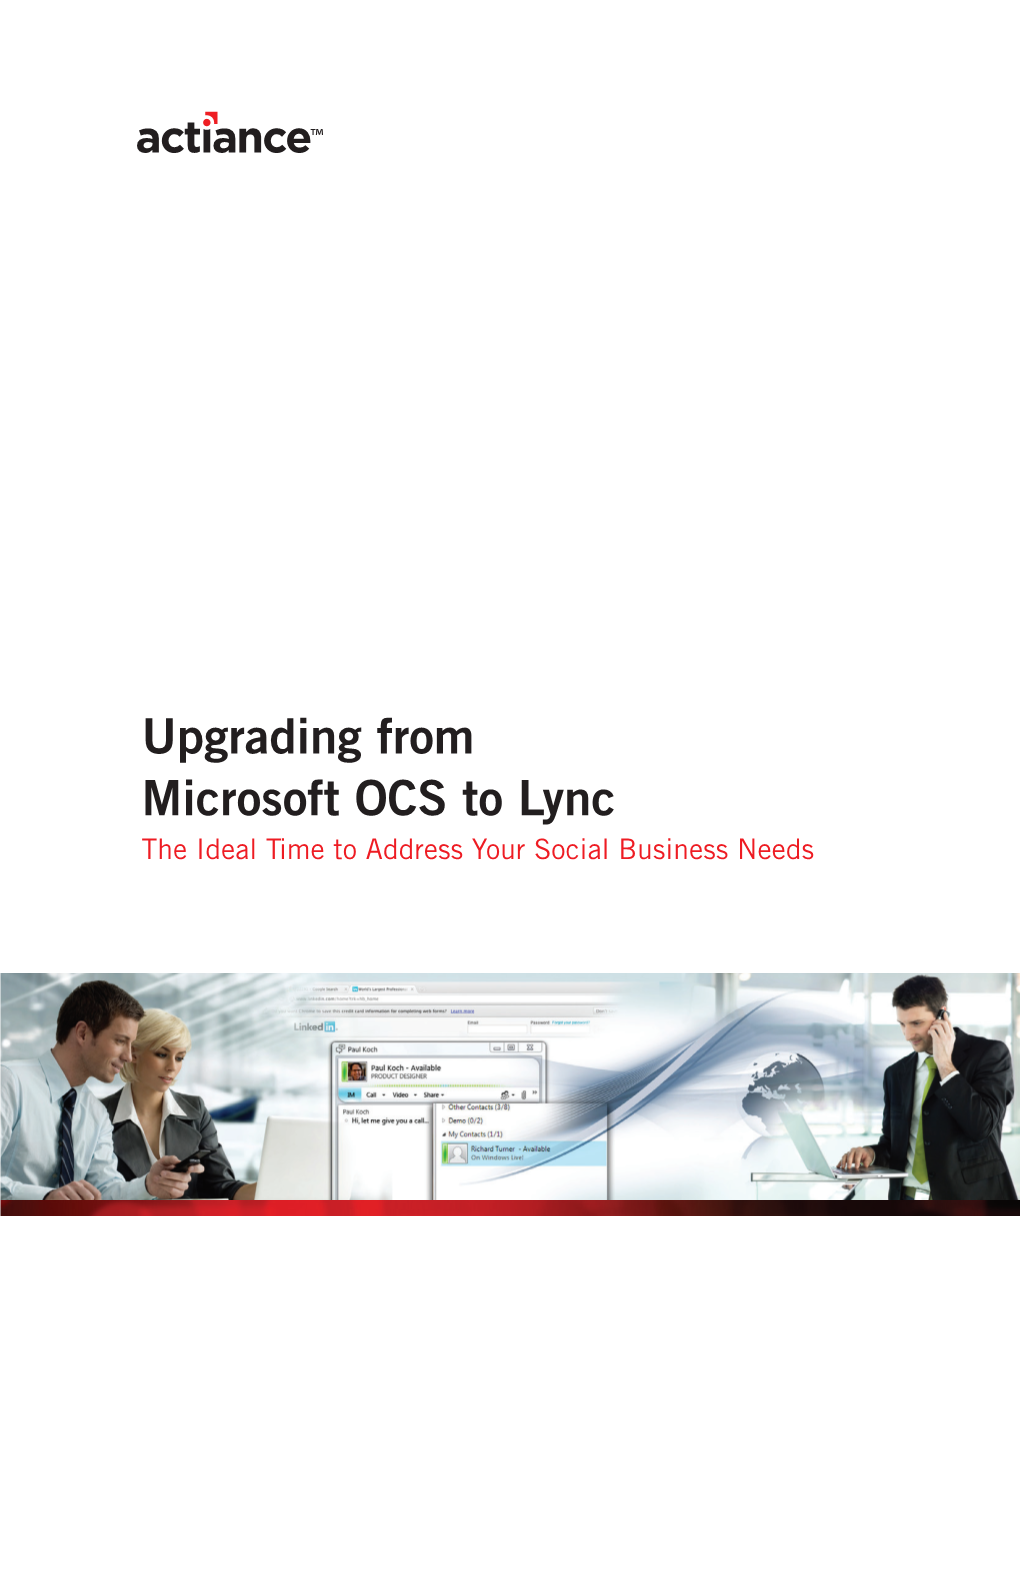 Upgrading from Microsoft OCS to Lync the Ideal Time to Address Your Social Business Needs Executive Summary